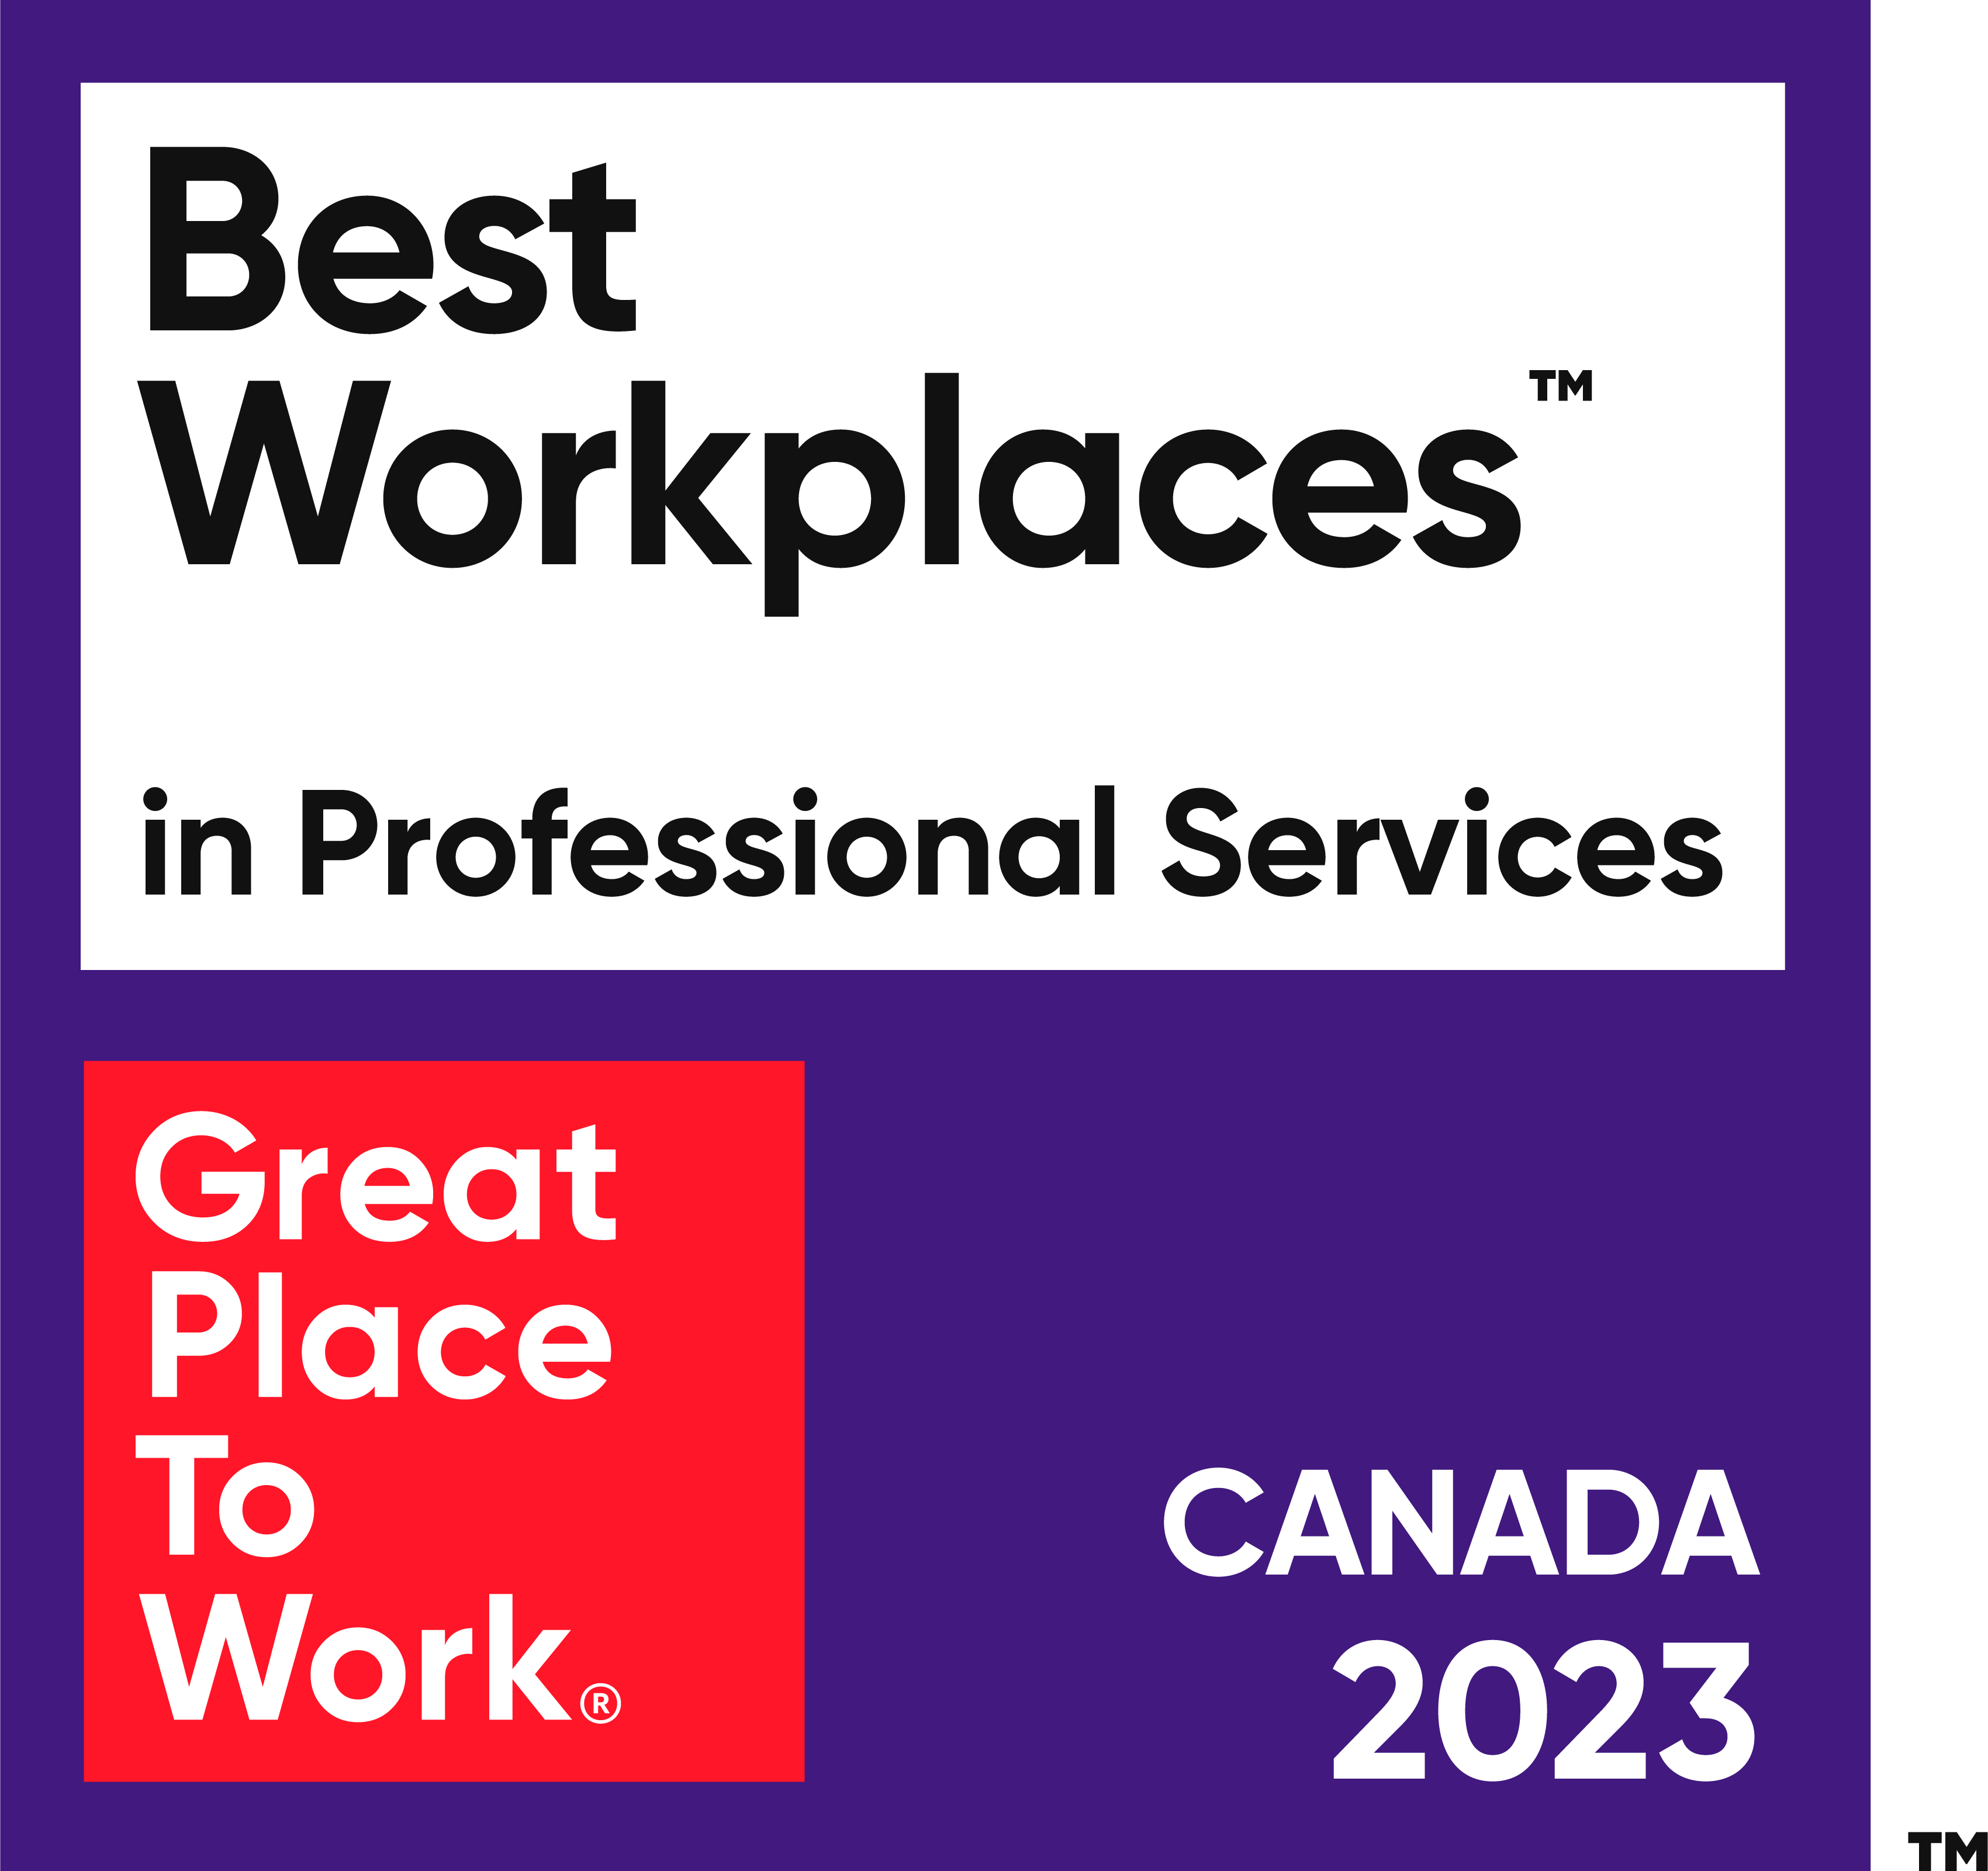 Best Workplaces in Professional Services